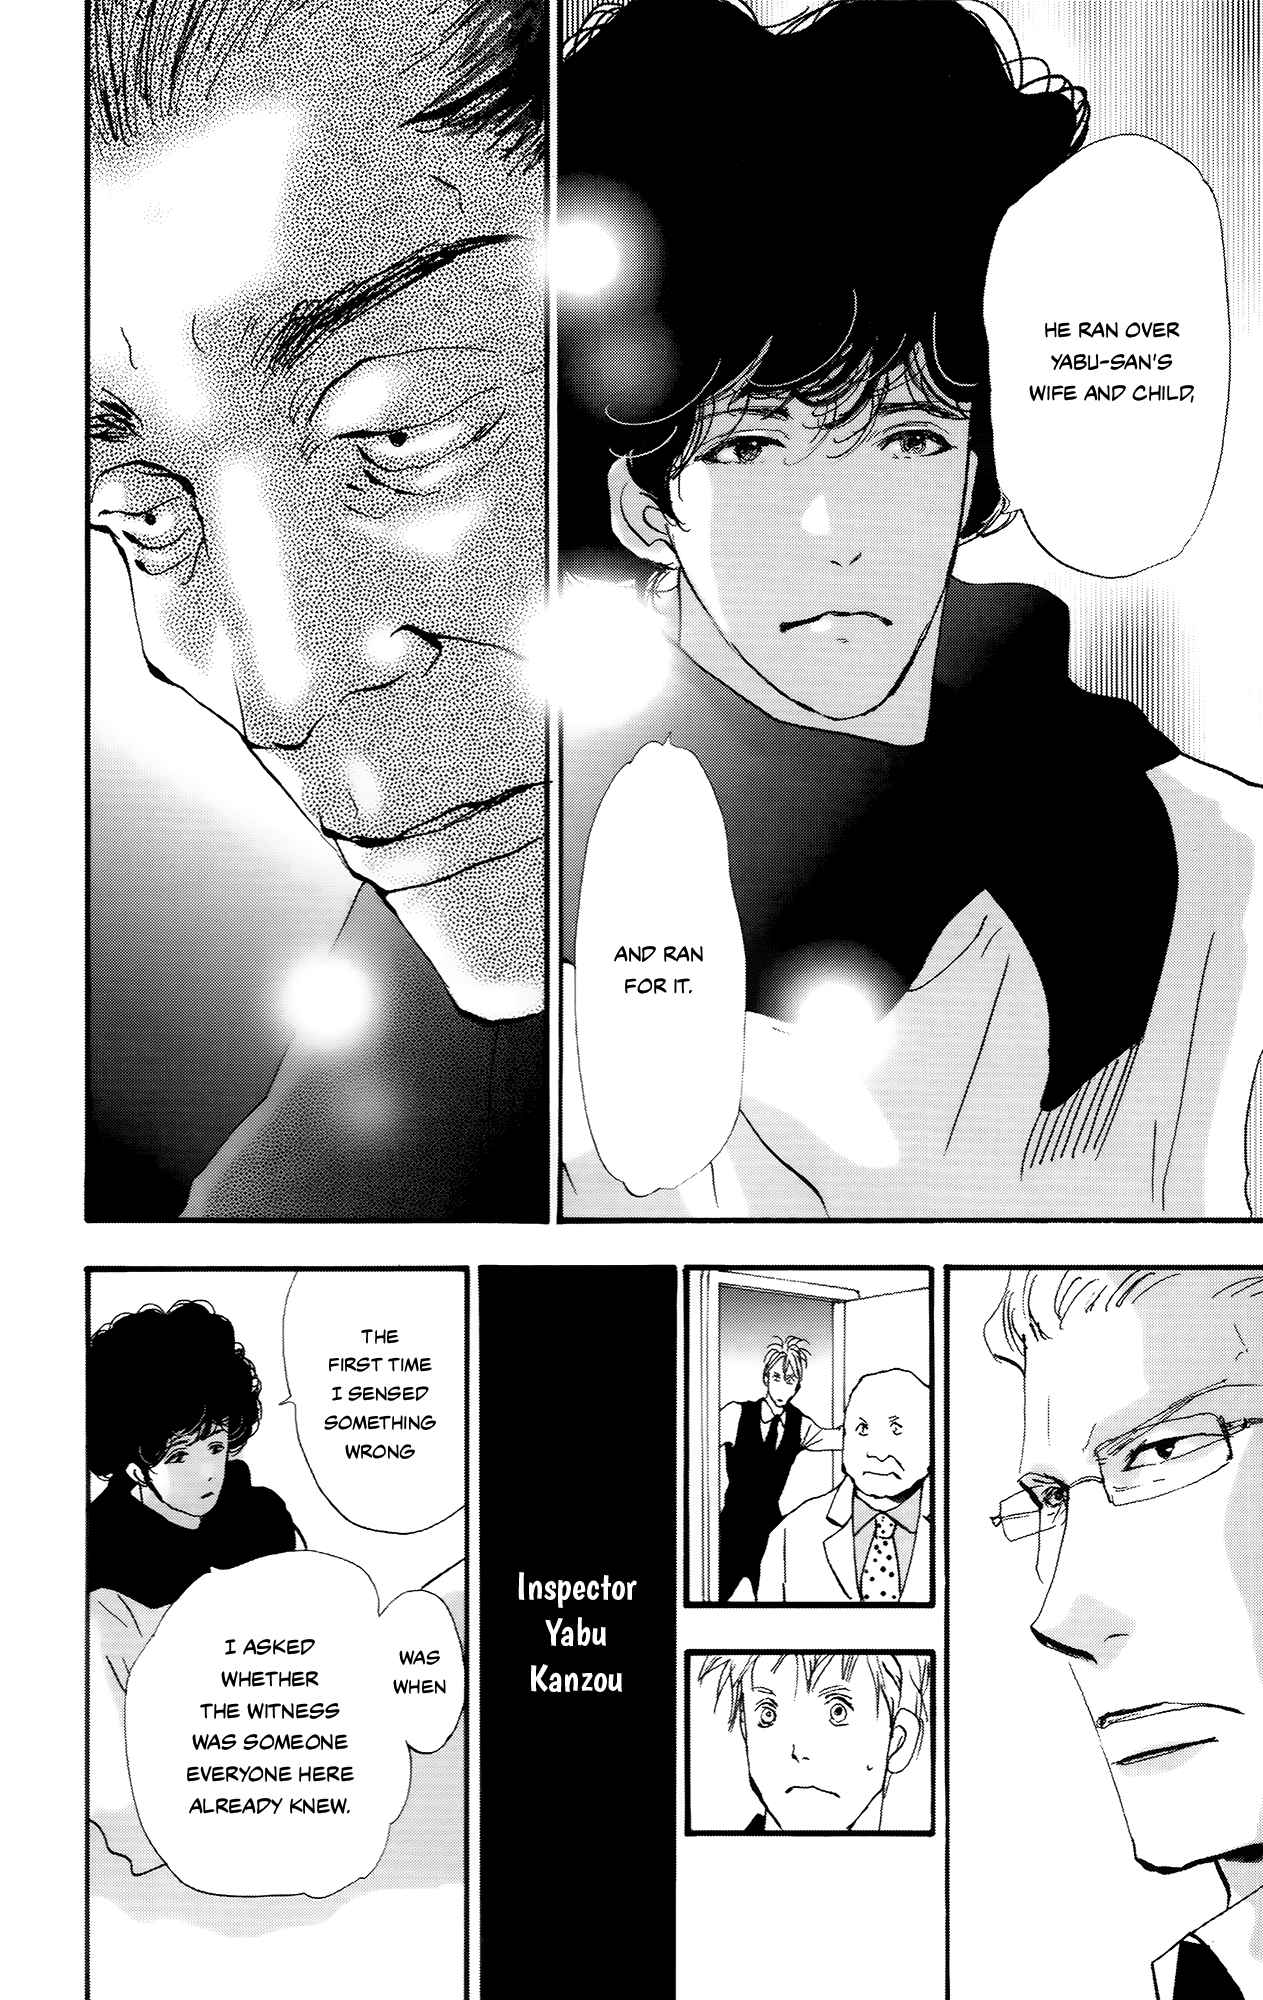 Mystery to Iunakare Vol. 1 Ch. 1 The Only Suspect